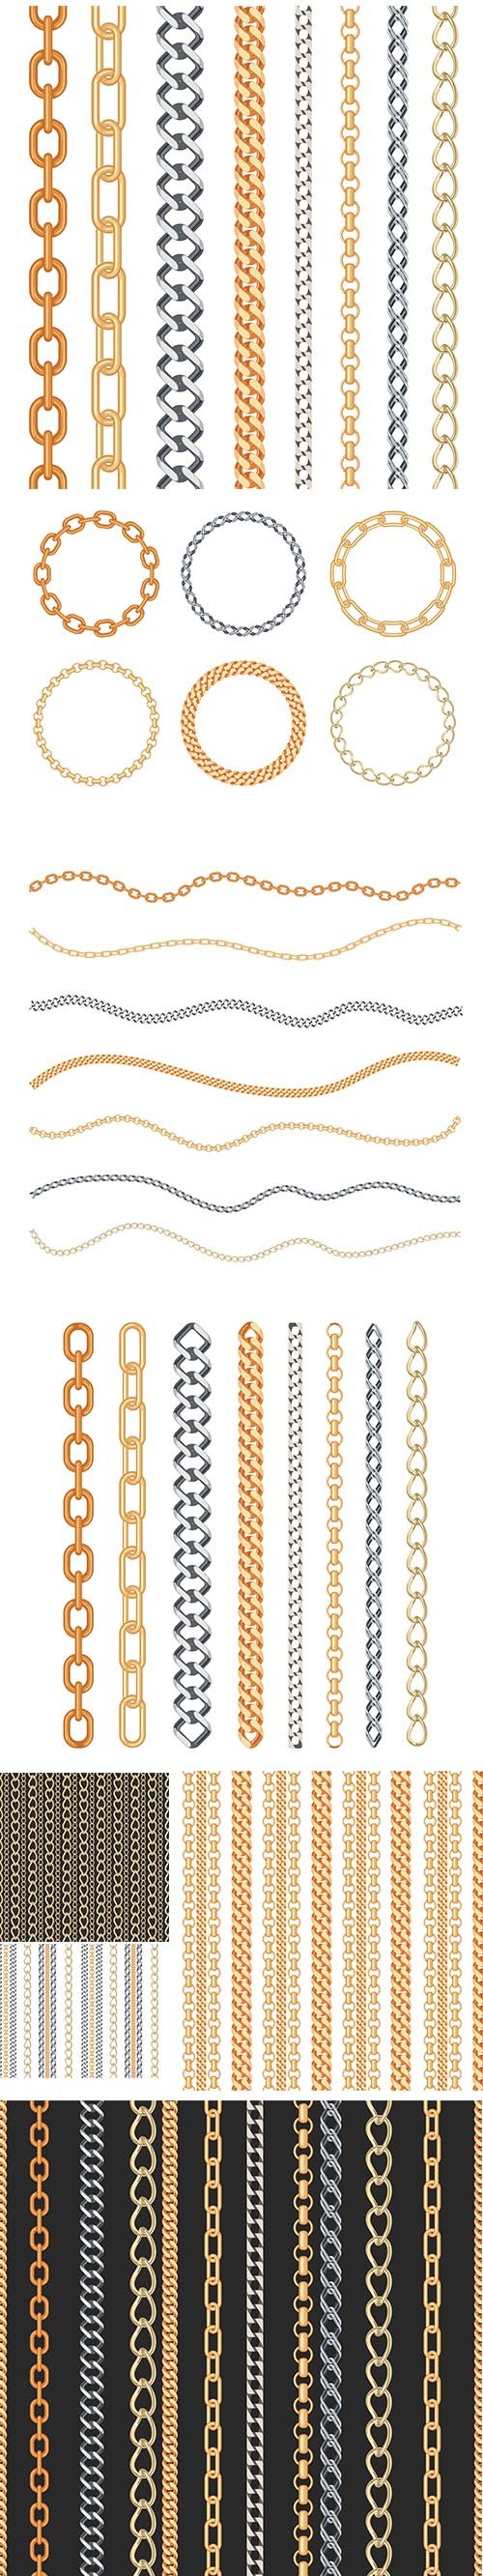 Fashion Golden and Silver Chain with Isolated Jewelry and Seamless Pattern Set